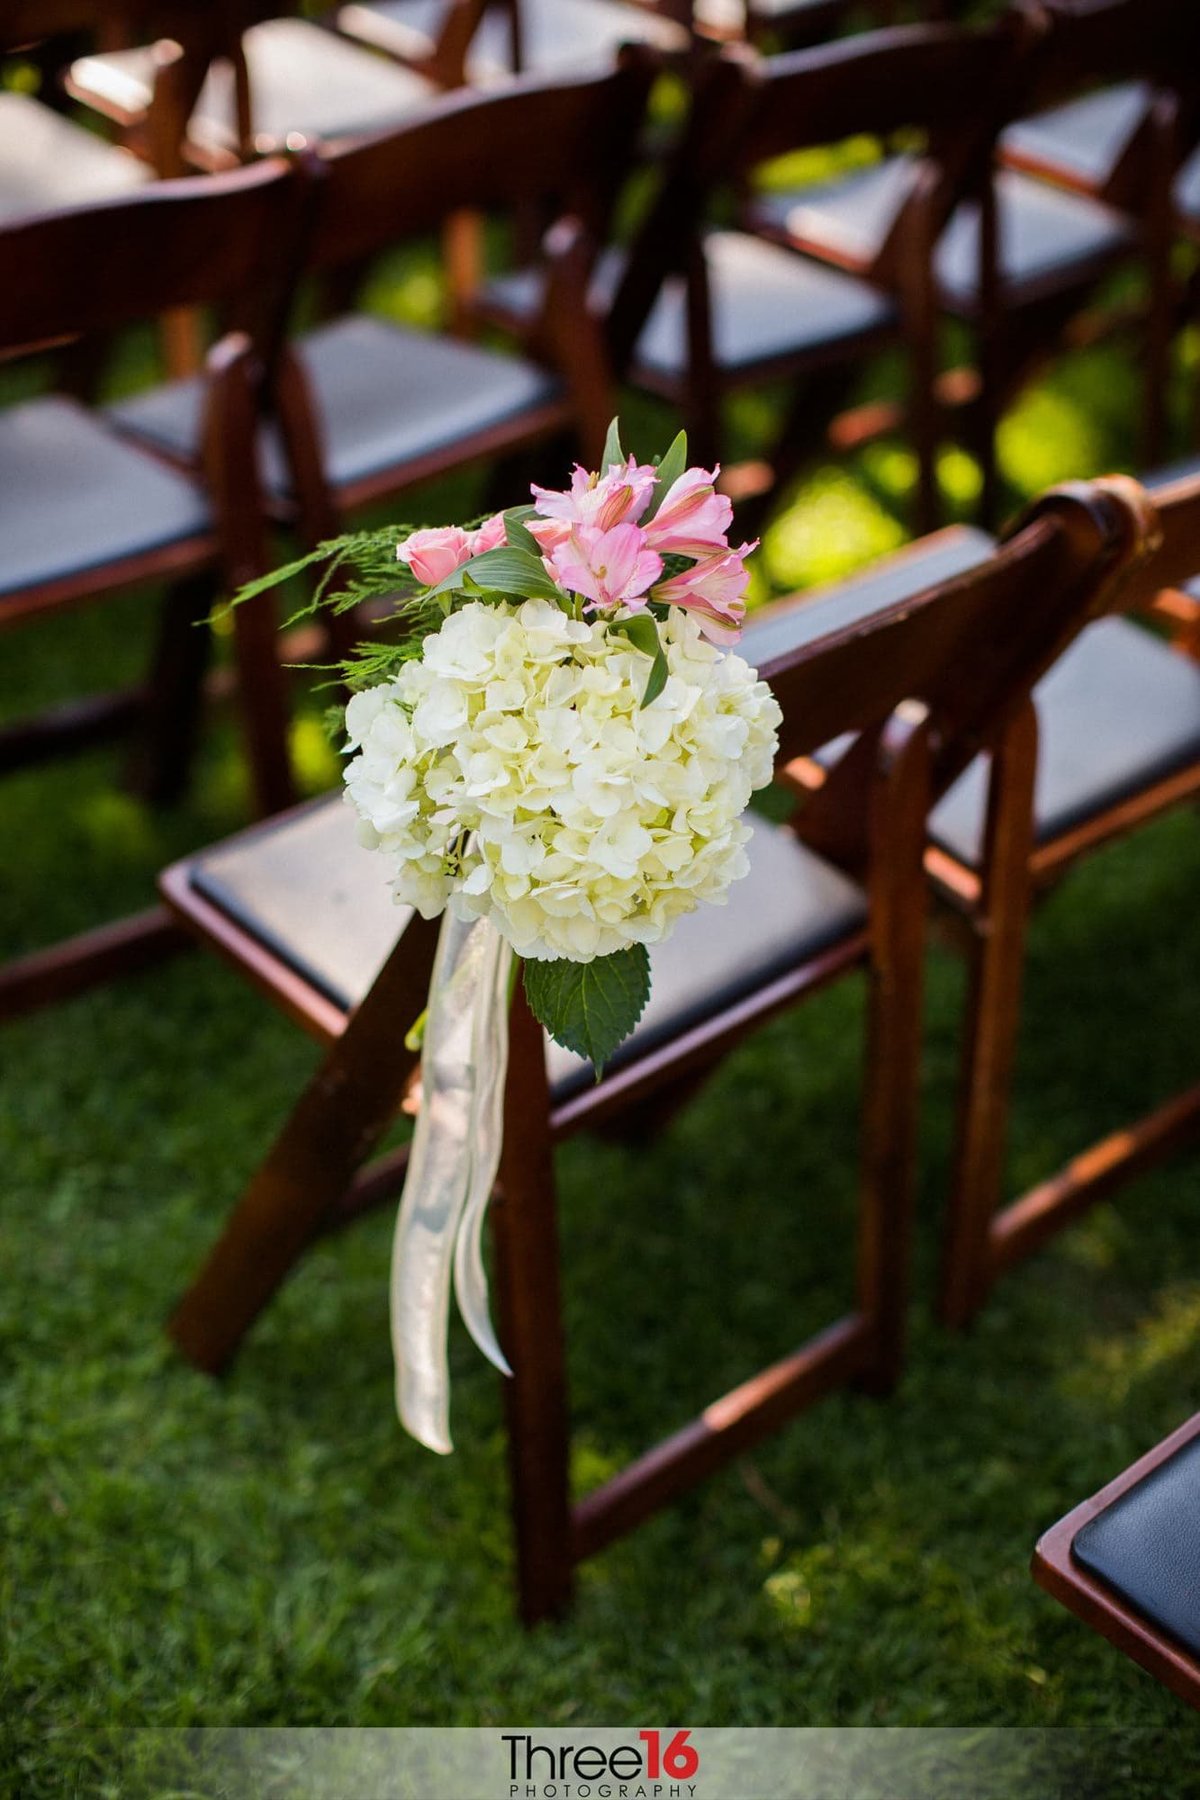 Chair with beautiful flowers  as a decor